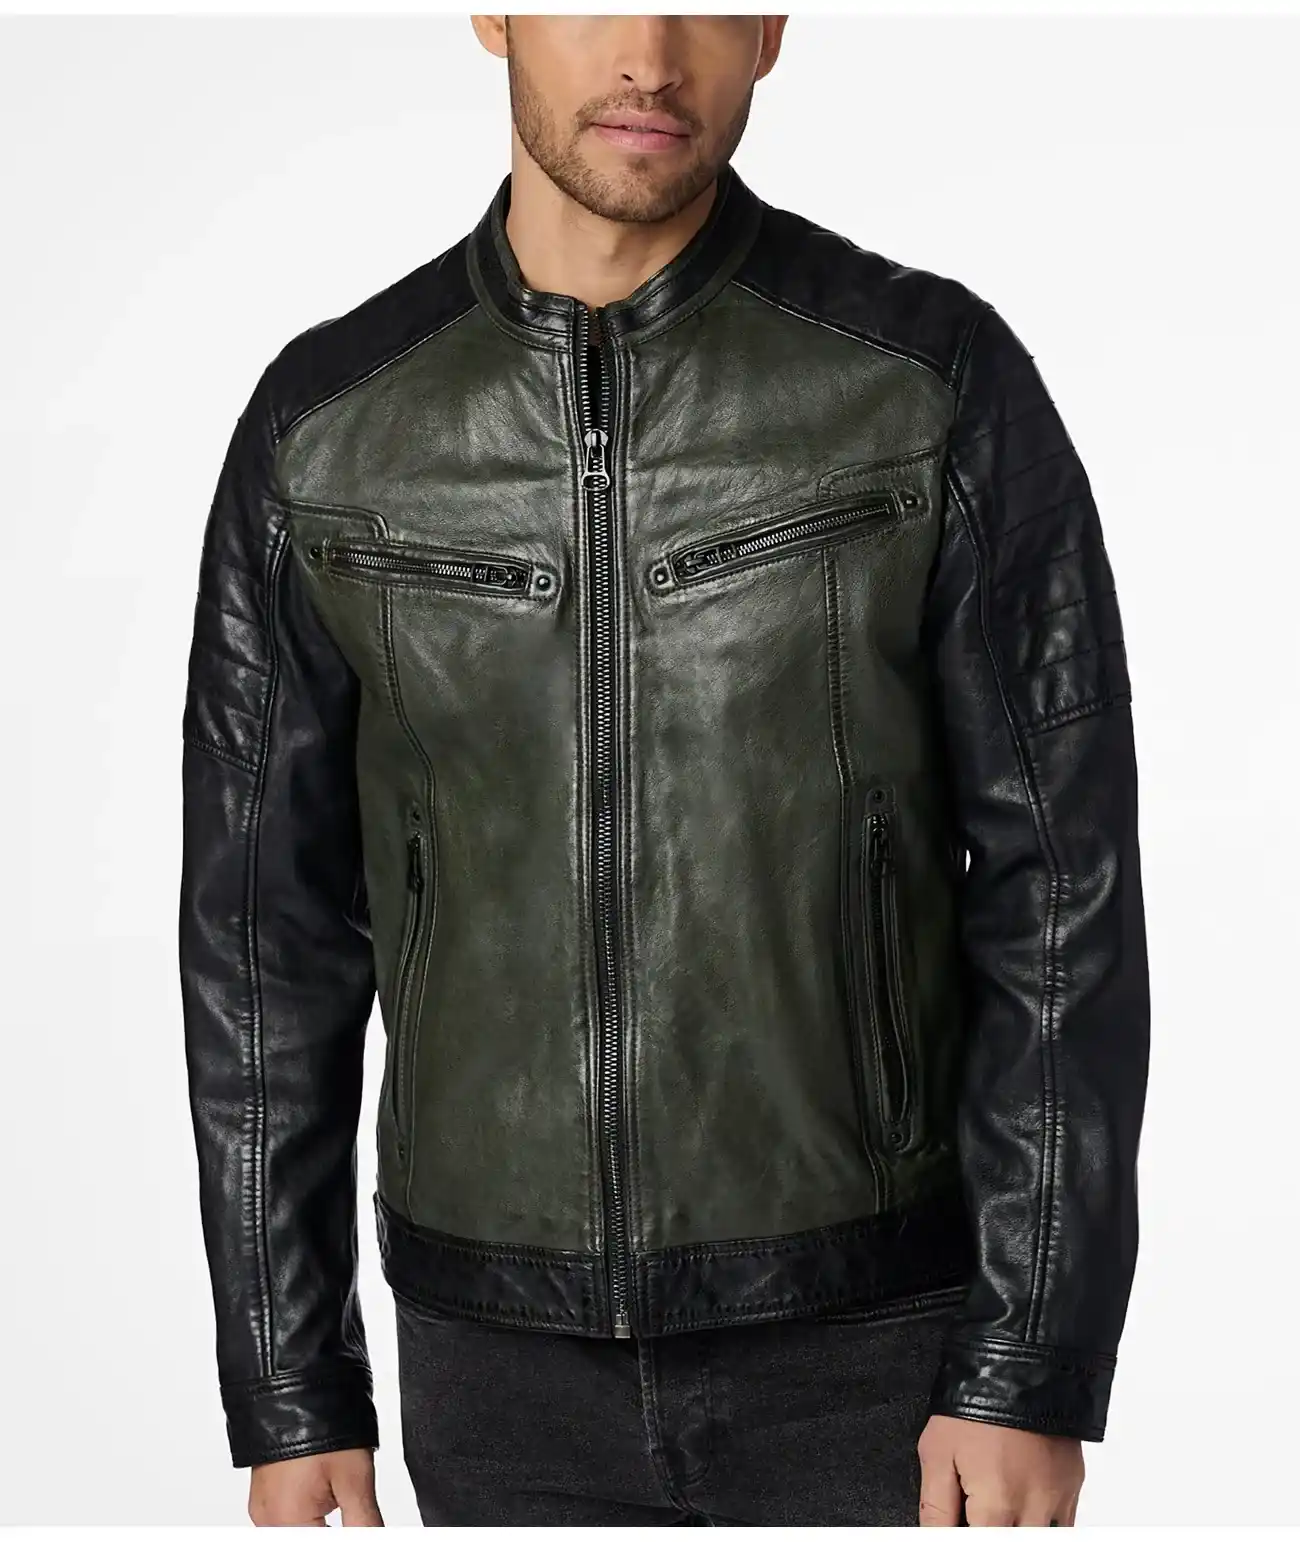 Dark Green With Black Leather Jacket